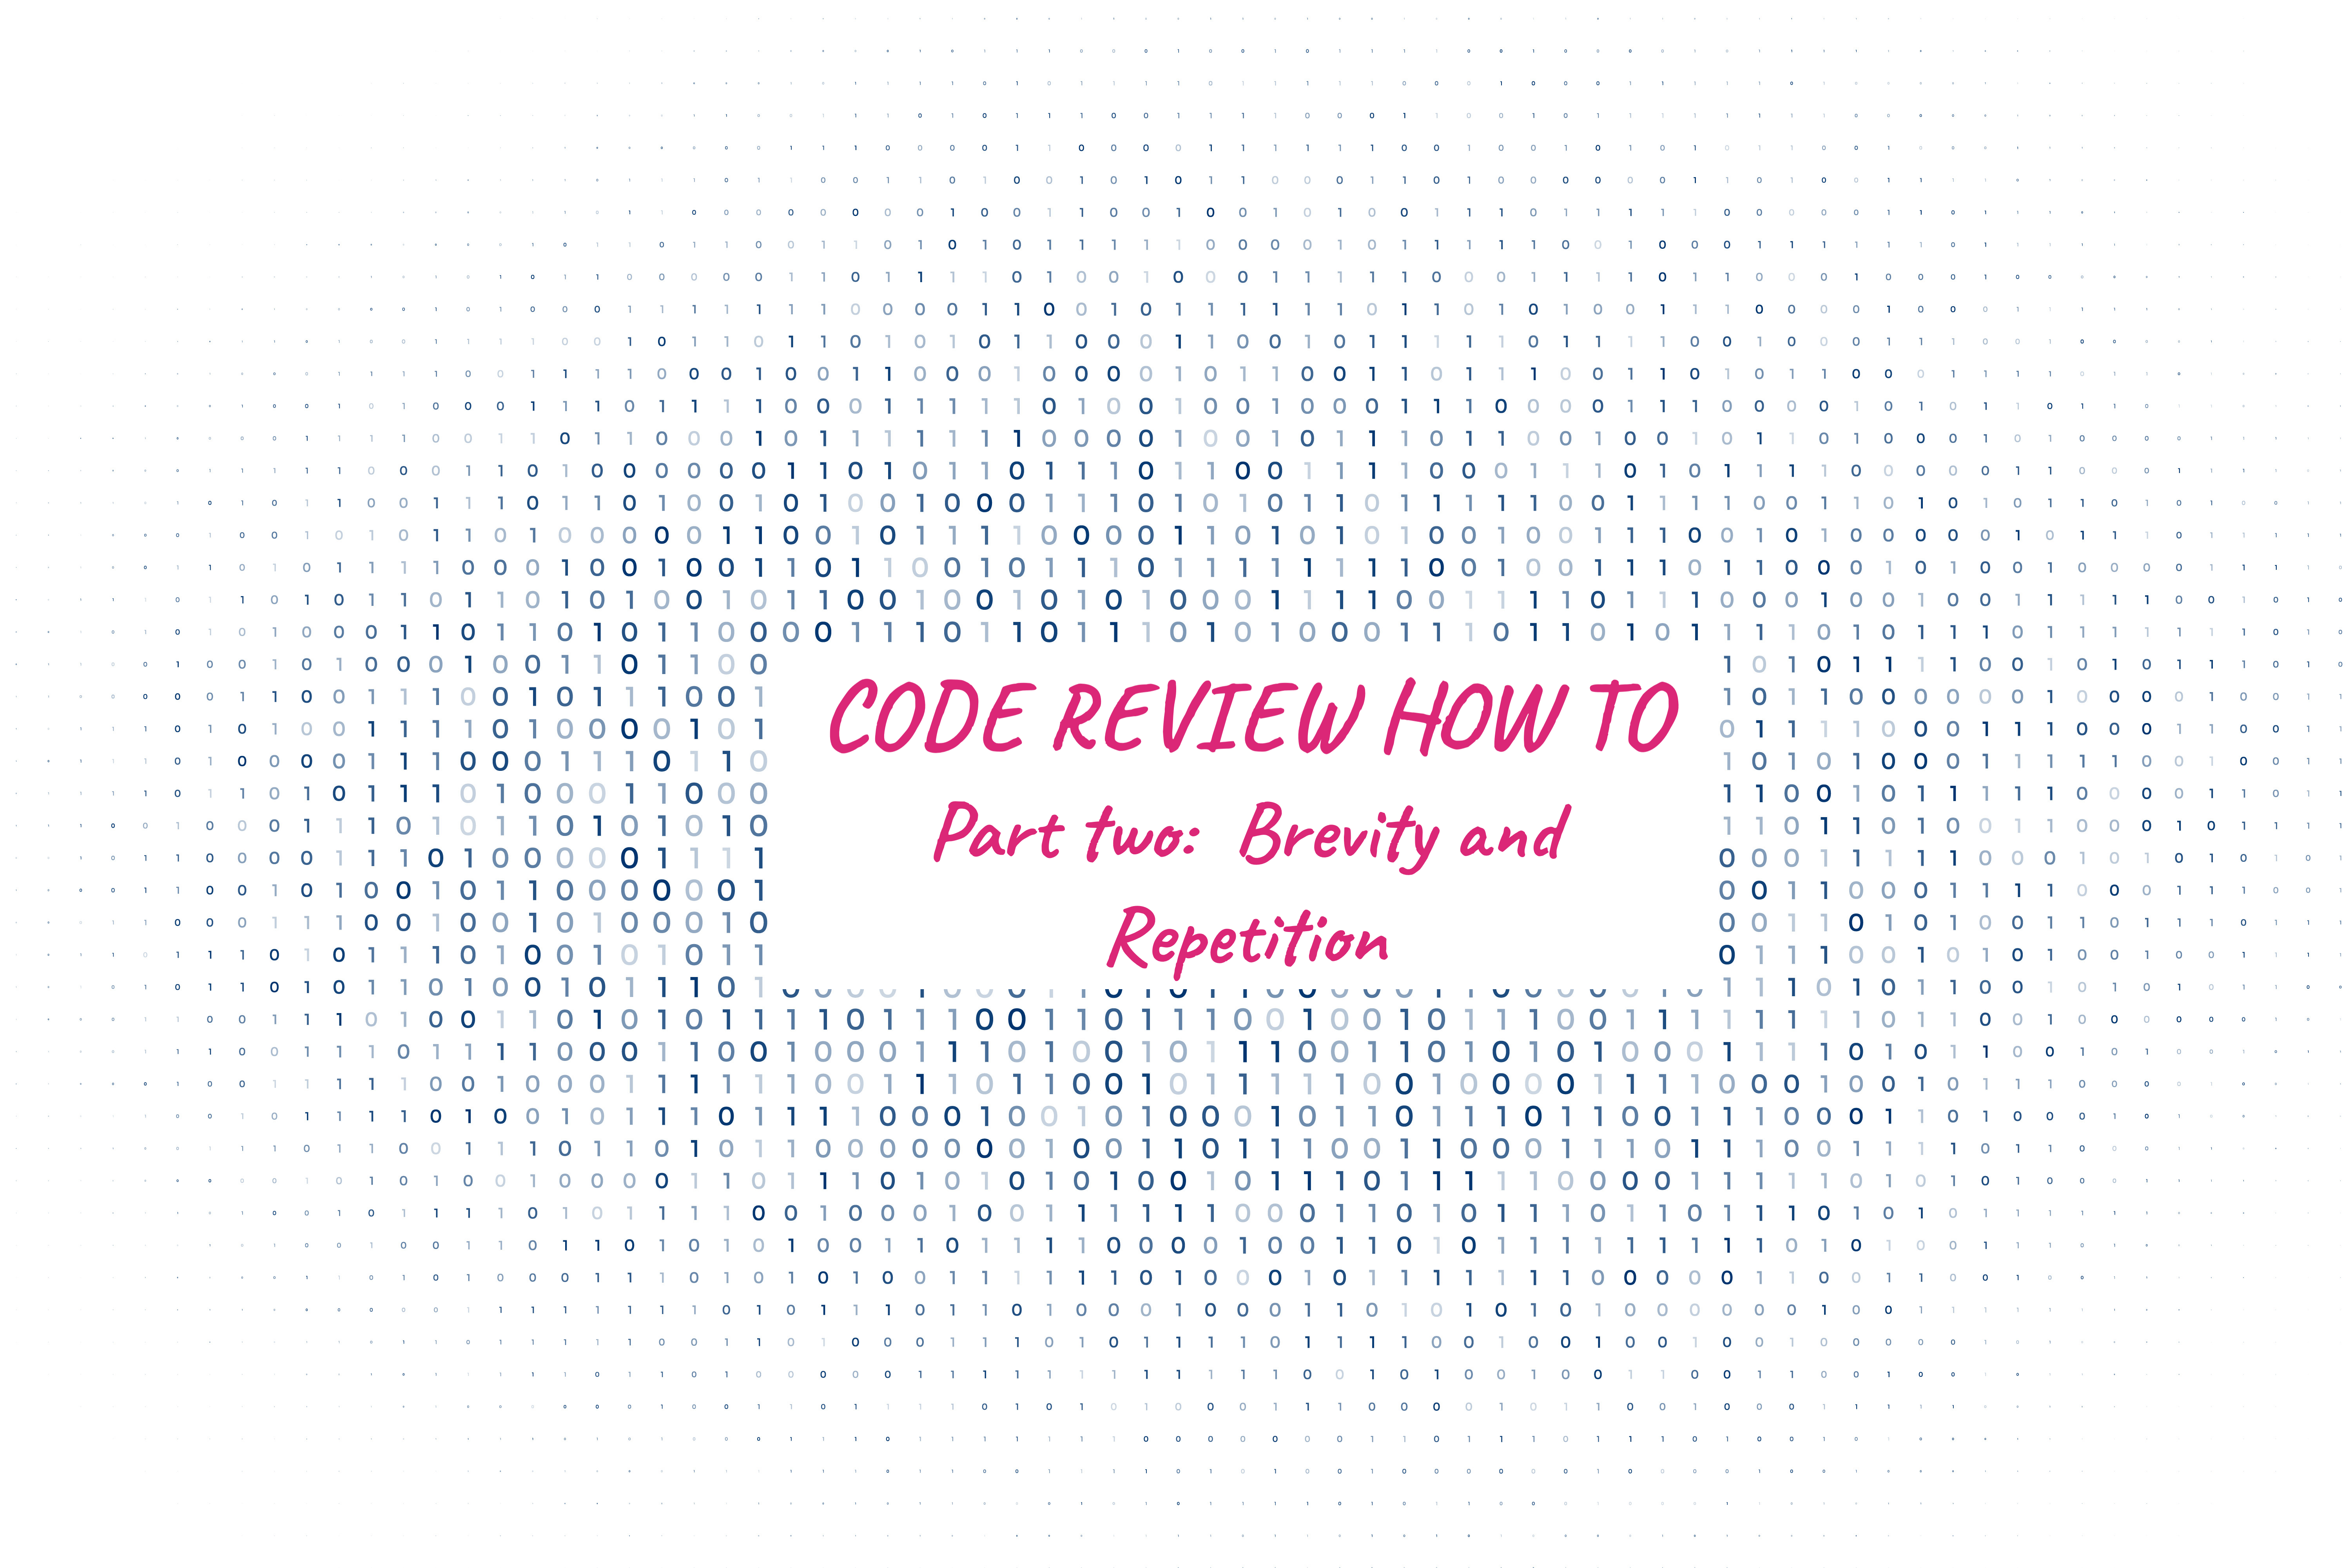 Title graphic, background of ones and zeroes with 'Code Review How To: Brevity and Repetition' overlayed on top